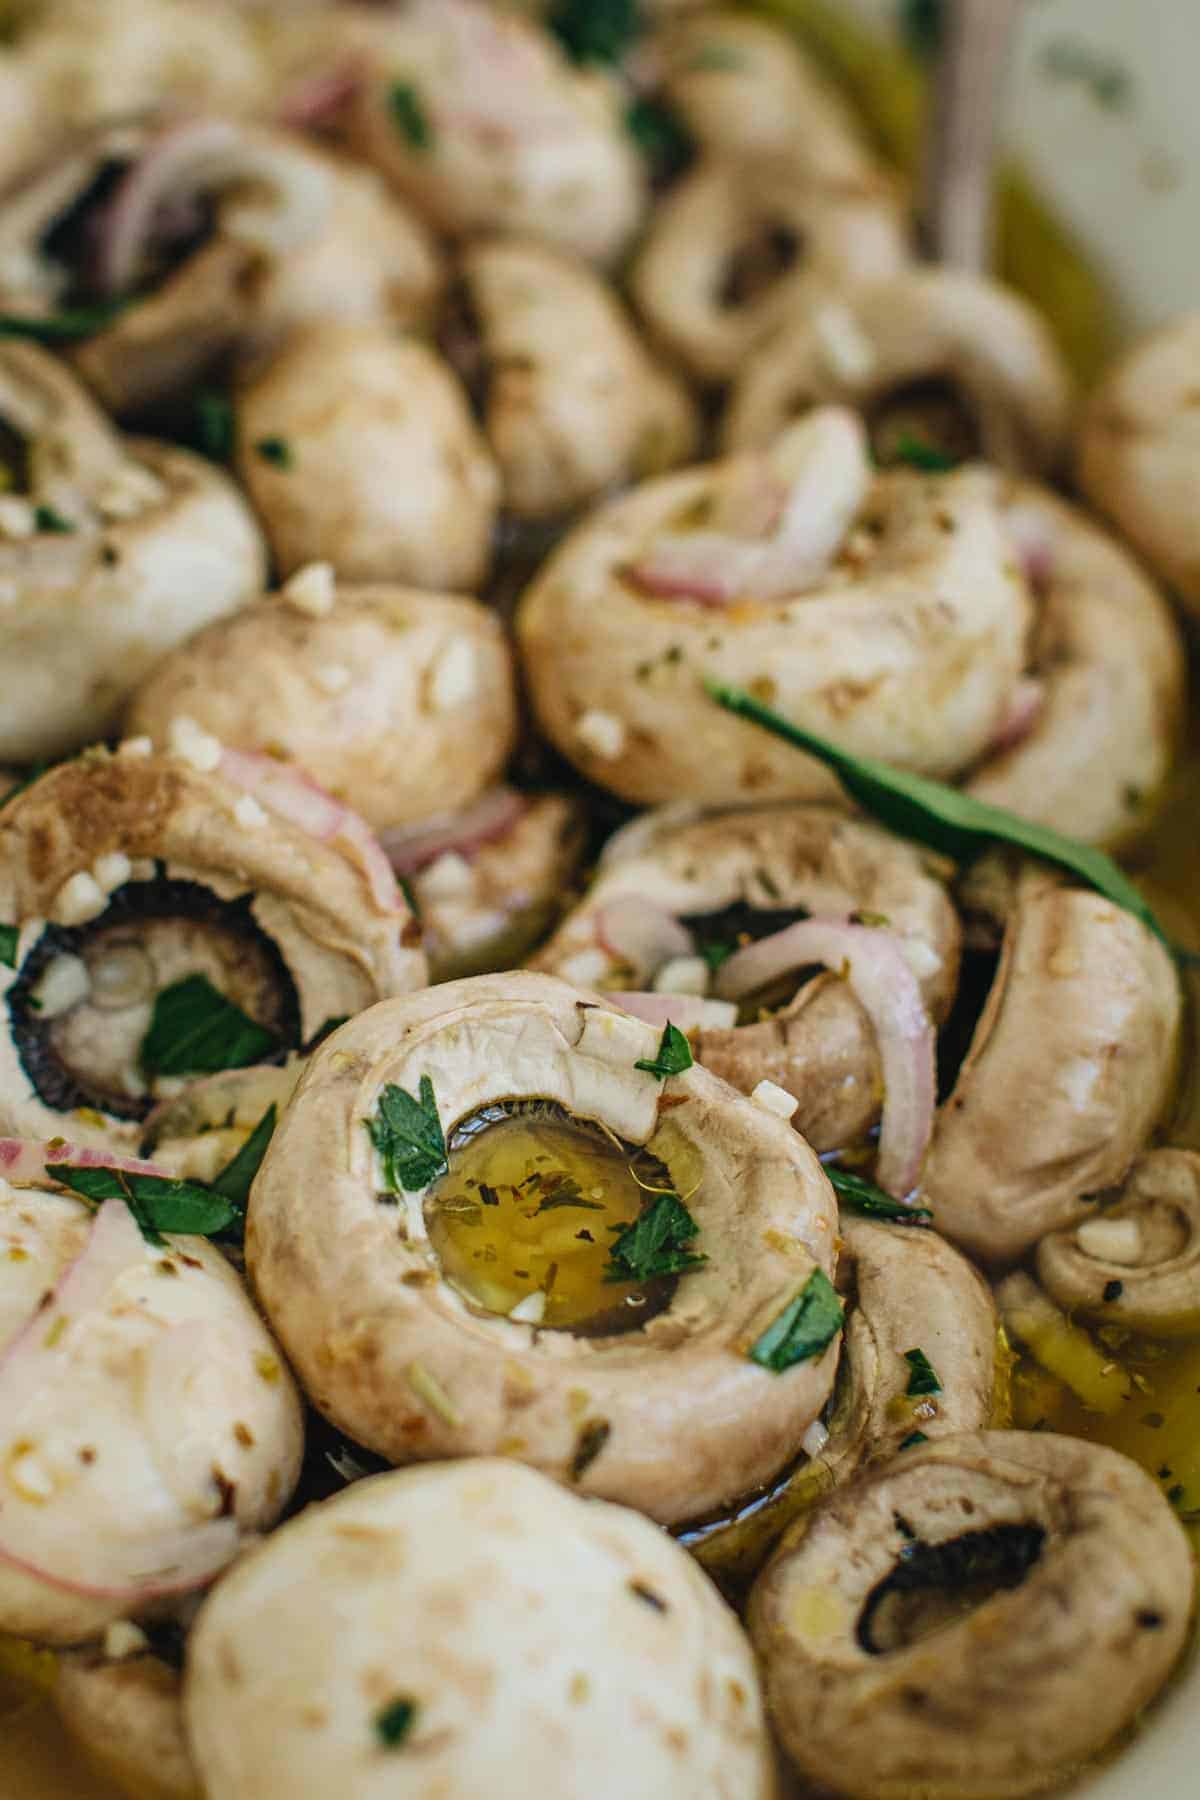 Marinated mushrooms for antipasto with herbs and marinated over them.